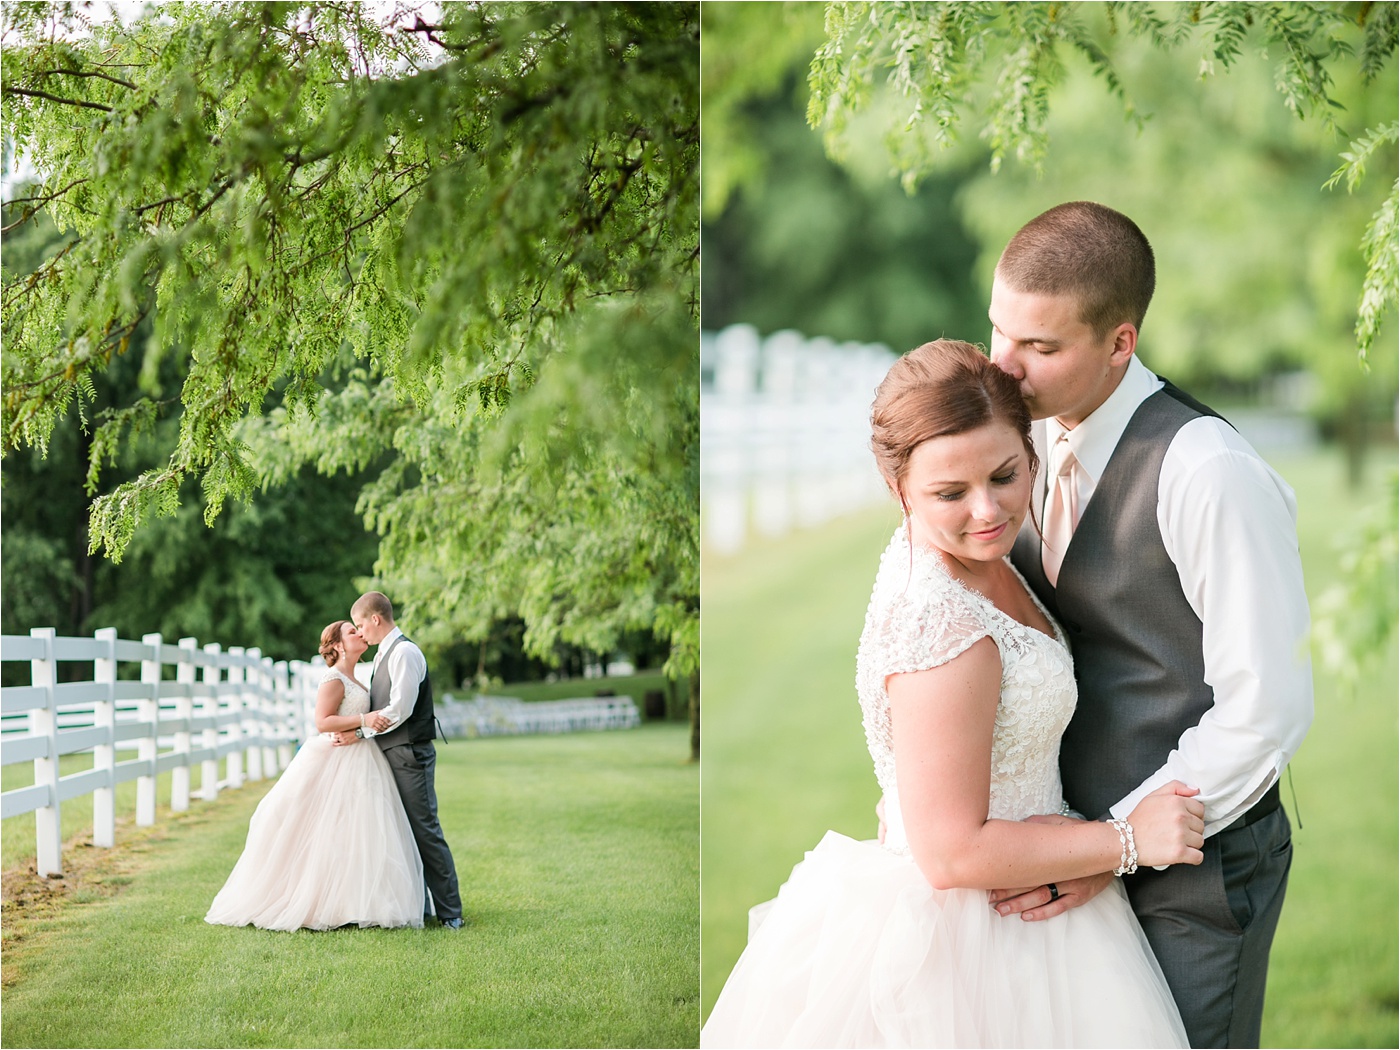 A Blush Outdoor wedding at Irongate Equestrian | KariMe Photography_0174